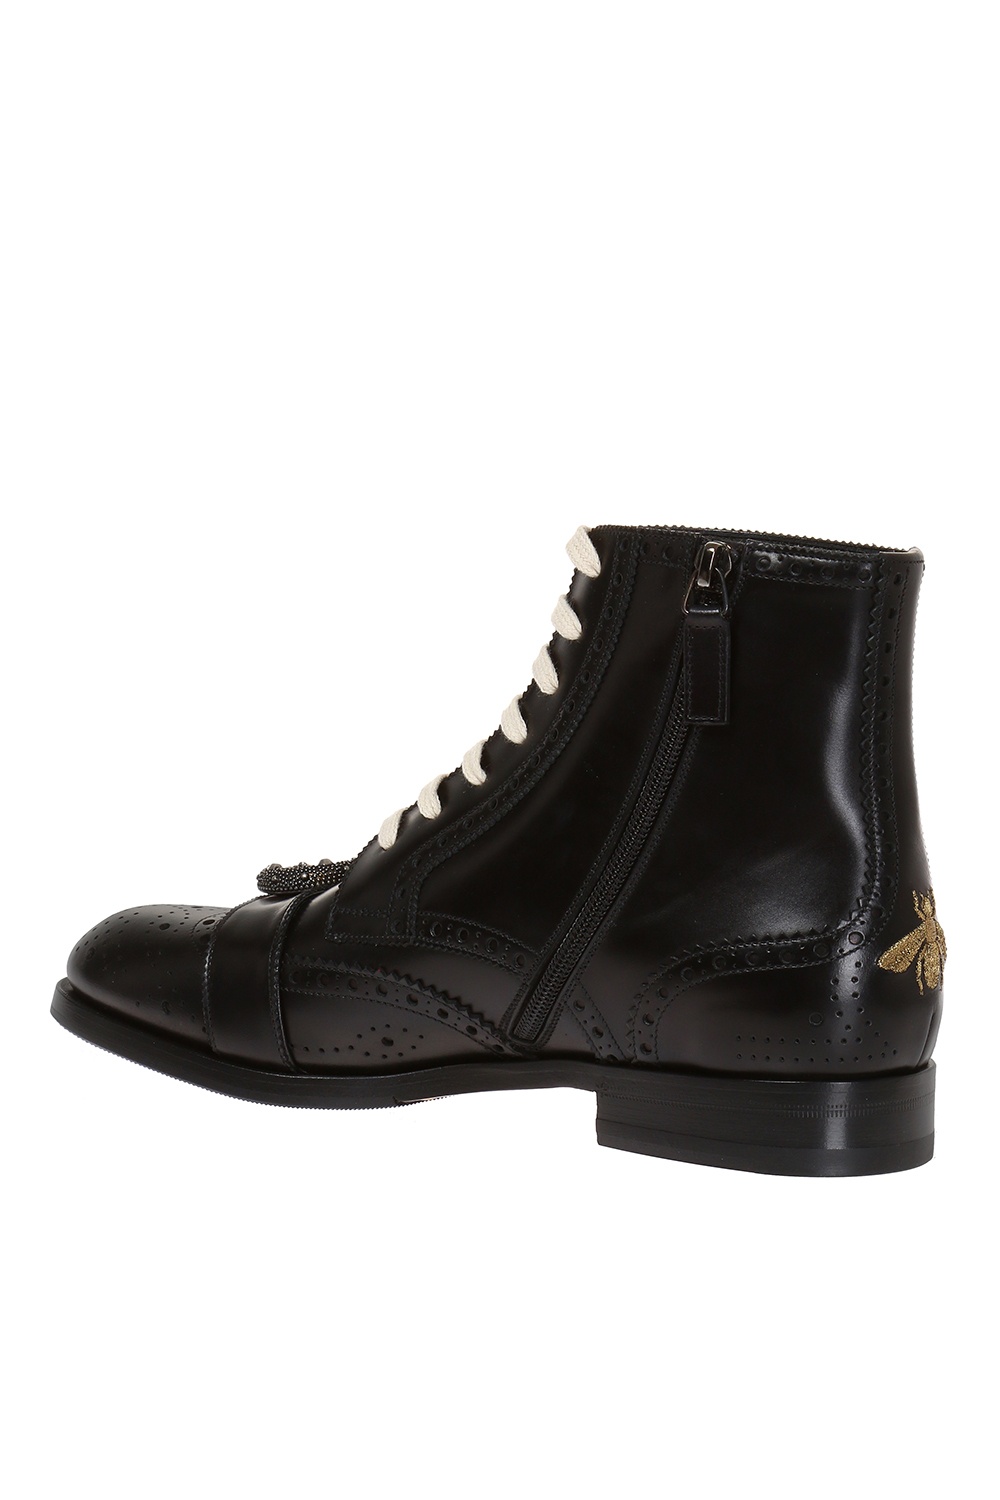 gucci queercore boots